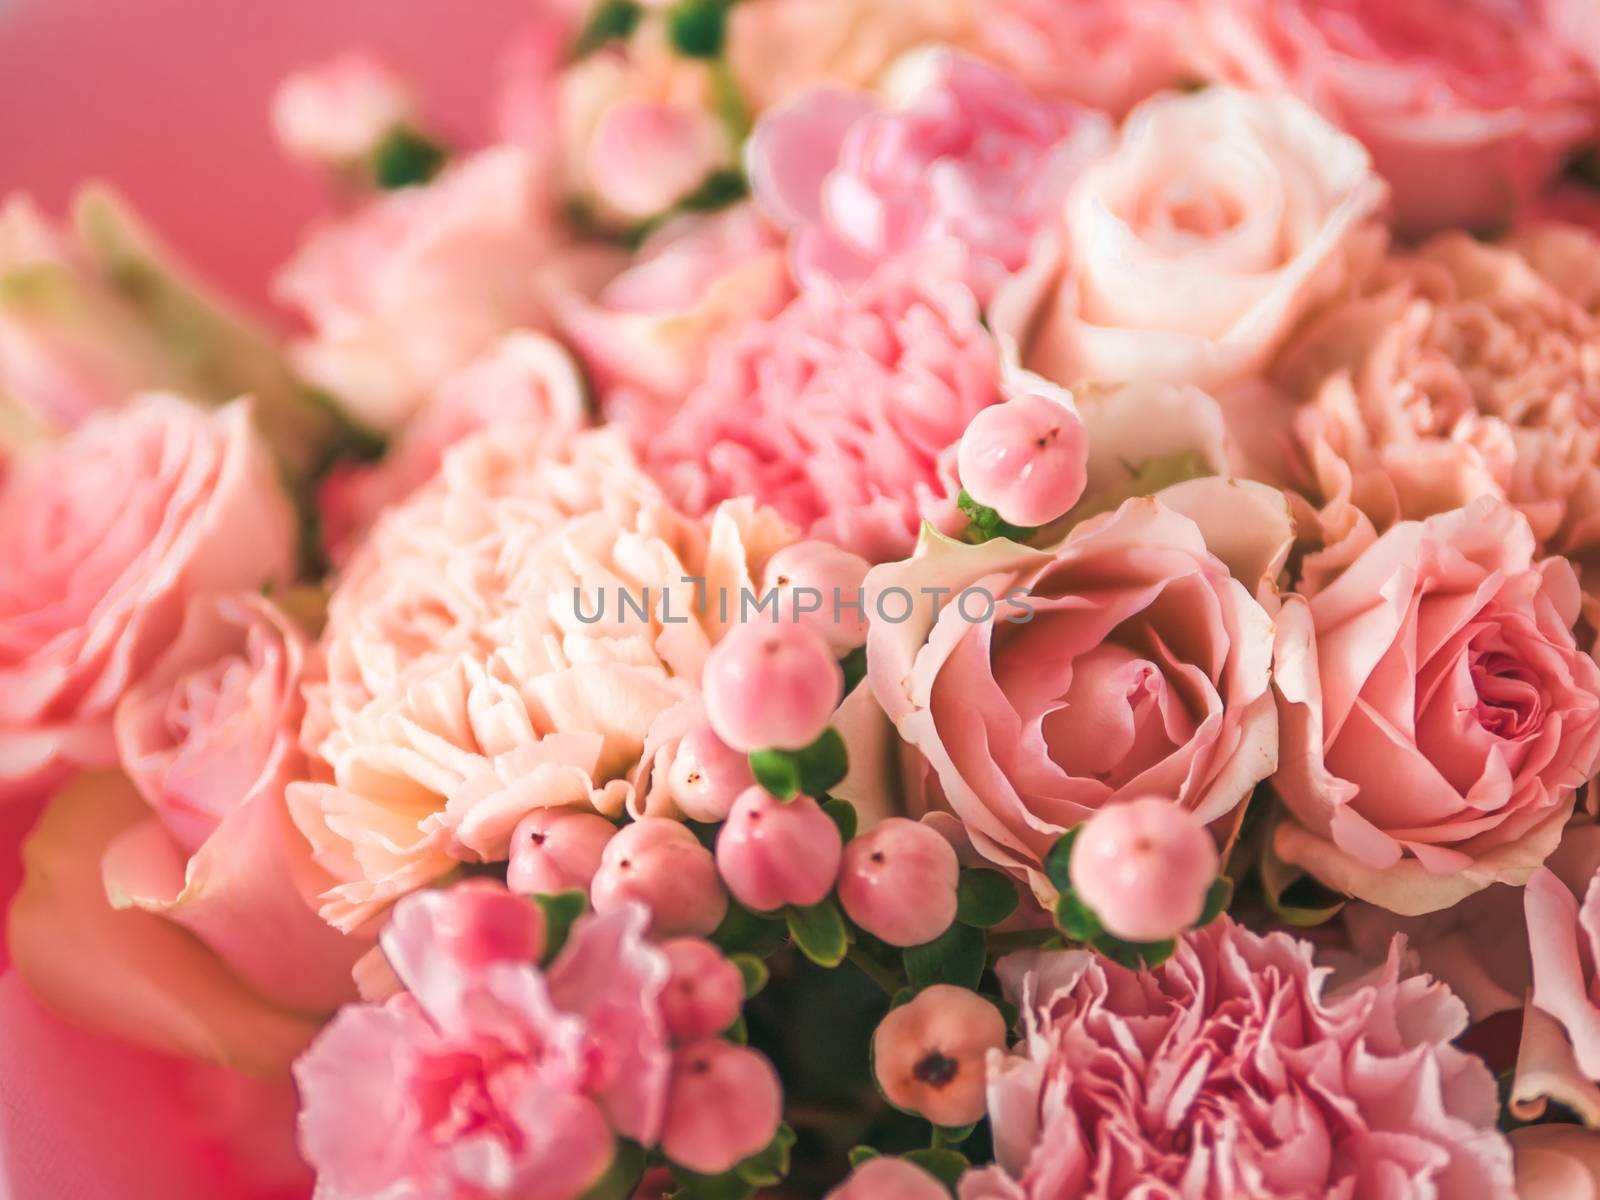 Extreme close up view of nice subtle delicate pink bouquet with roses, dianthus, hypericum, clove. Shallow DOF. Copy space for text.